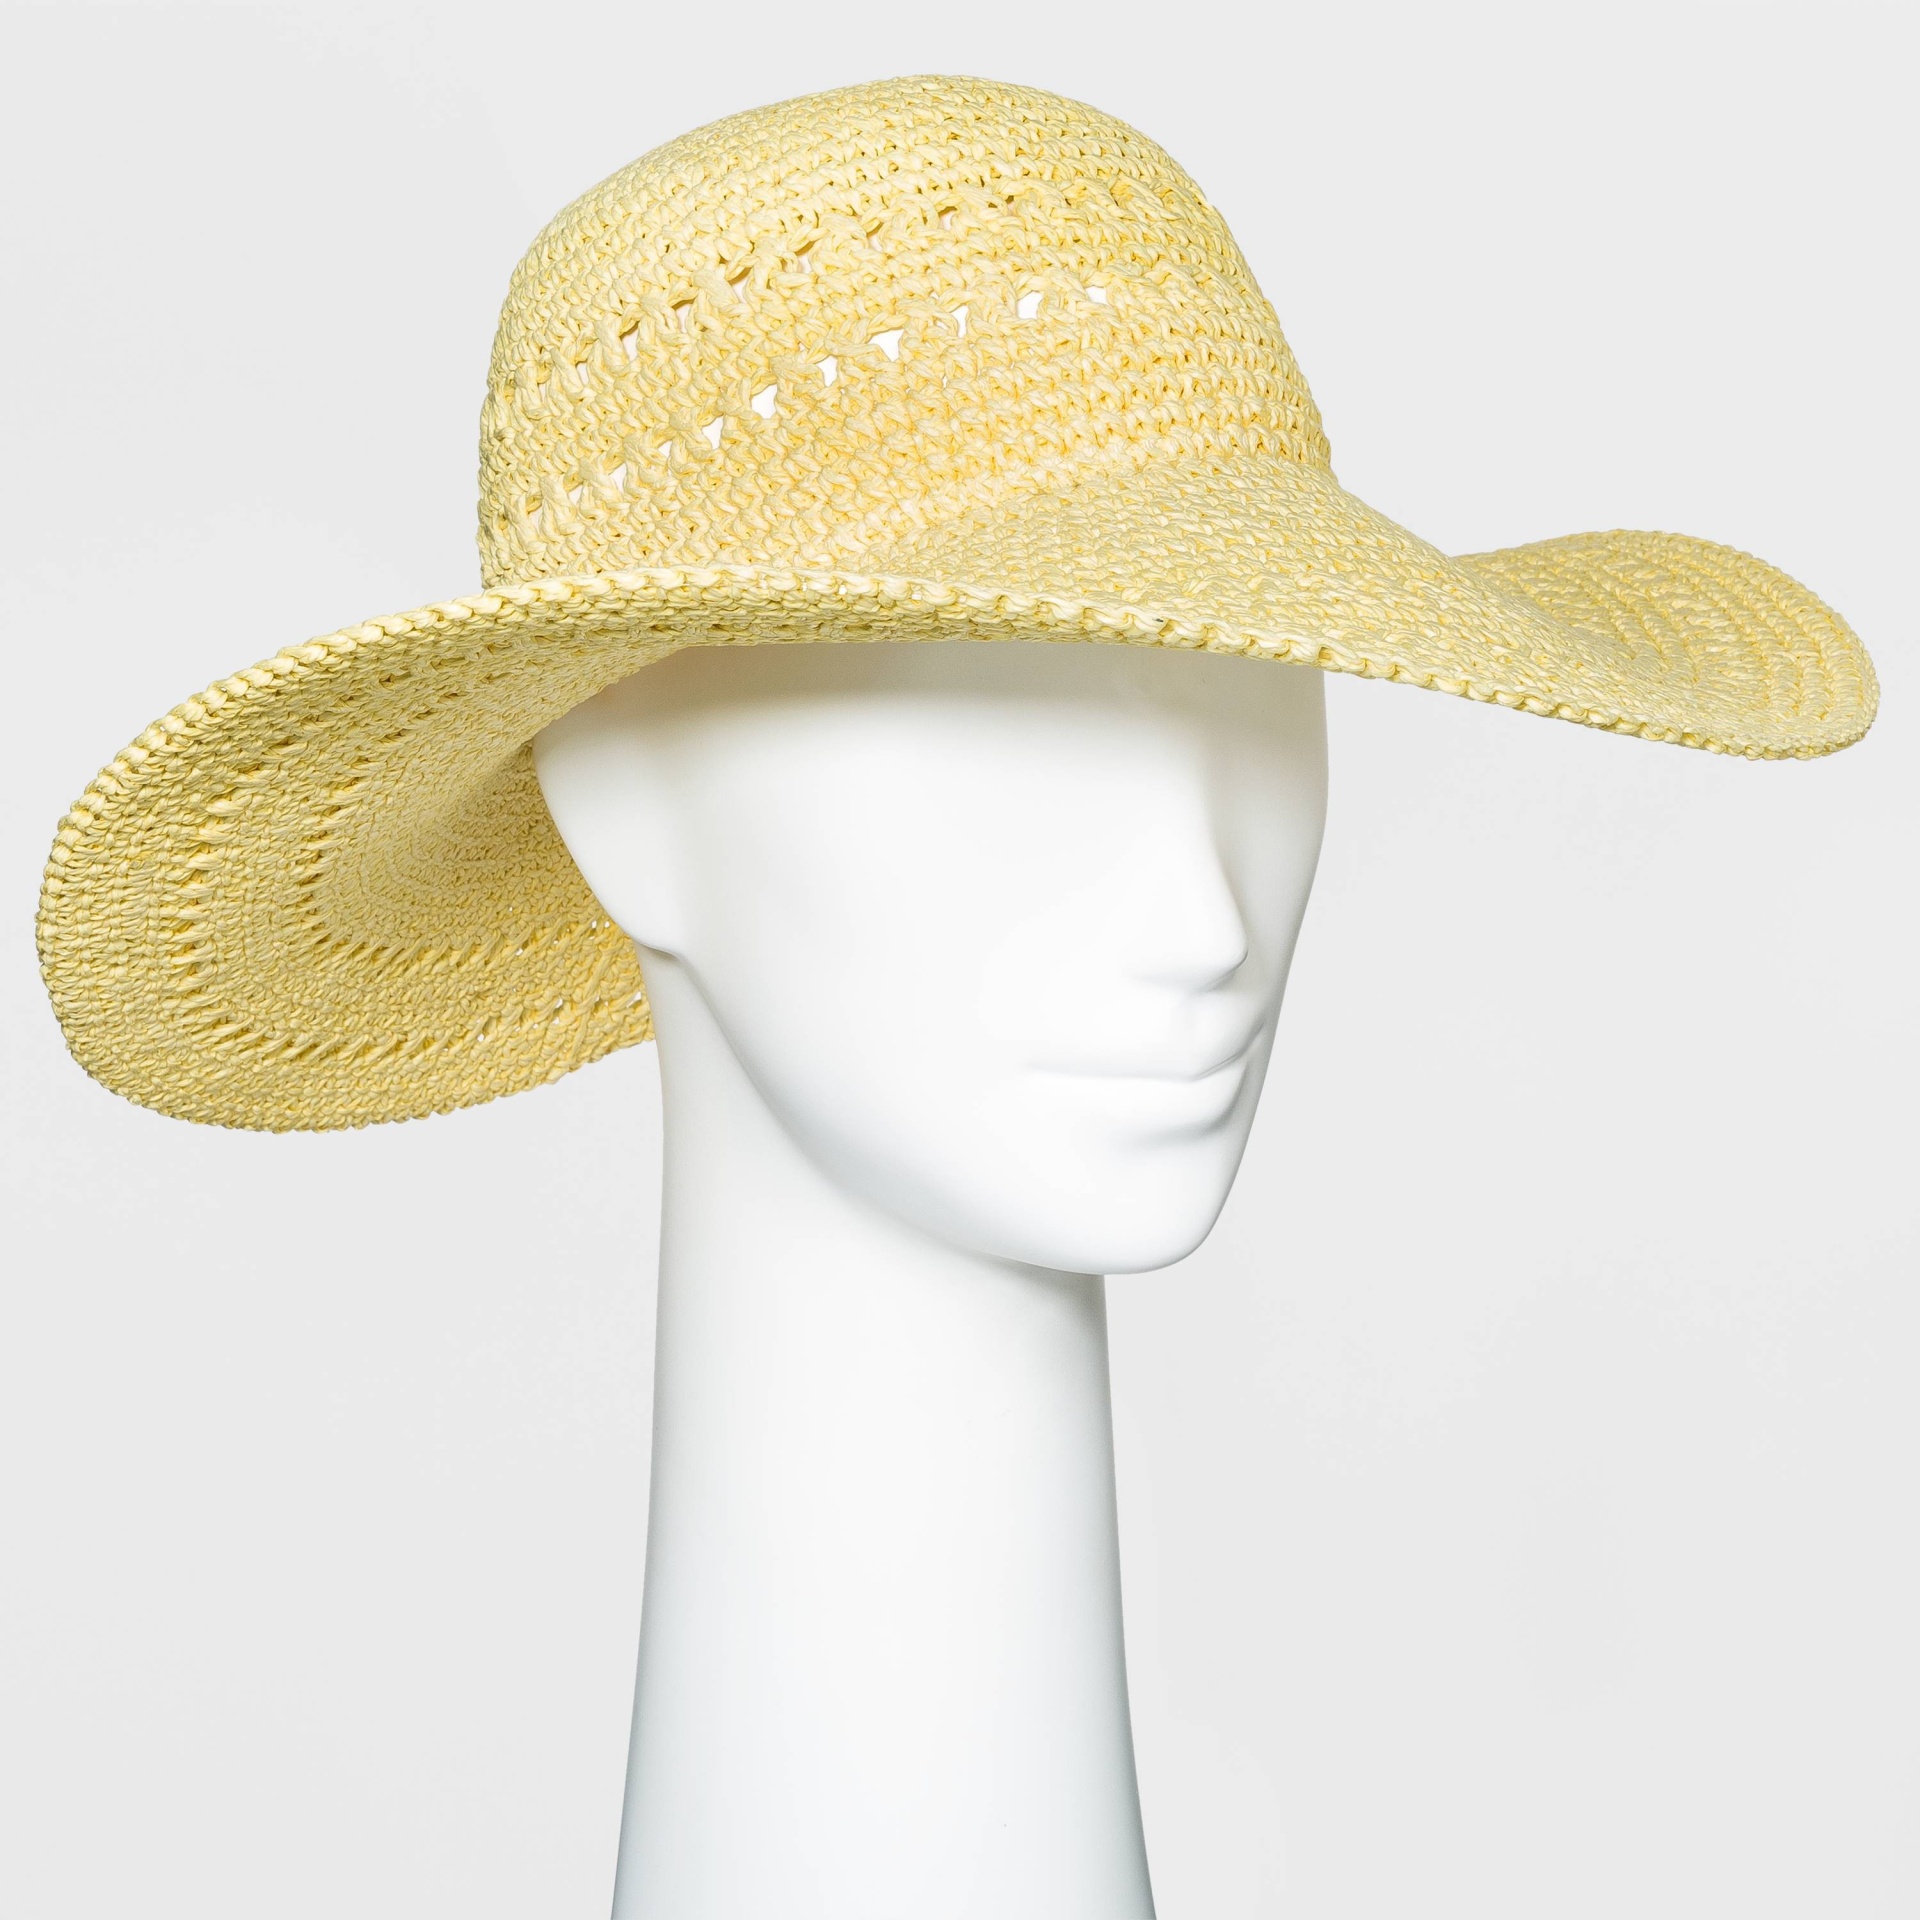 slide 1 of 1, Women's Open Weave Straw Floppy Hat - A New Day Yellow, 1 ct